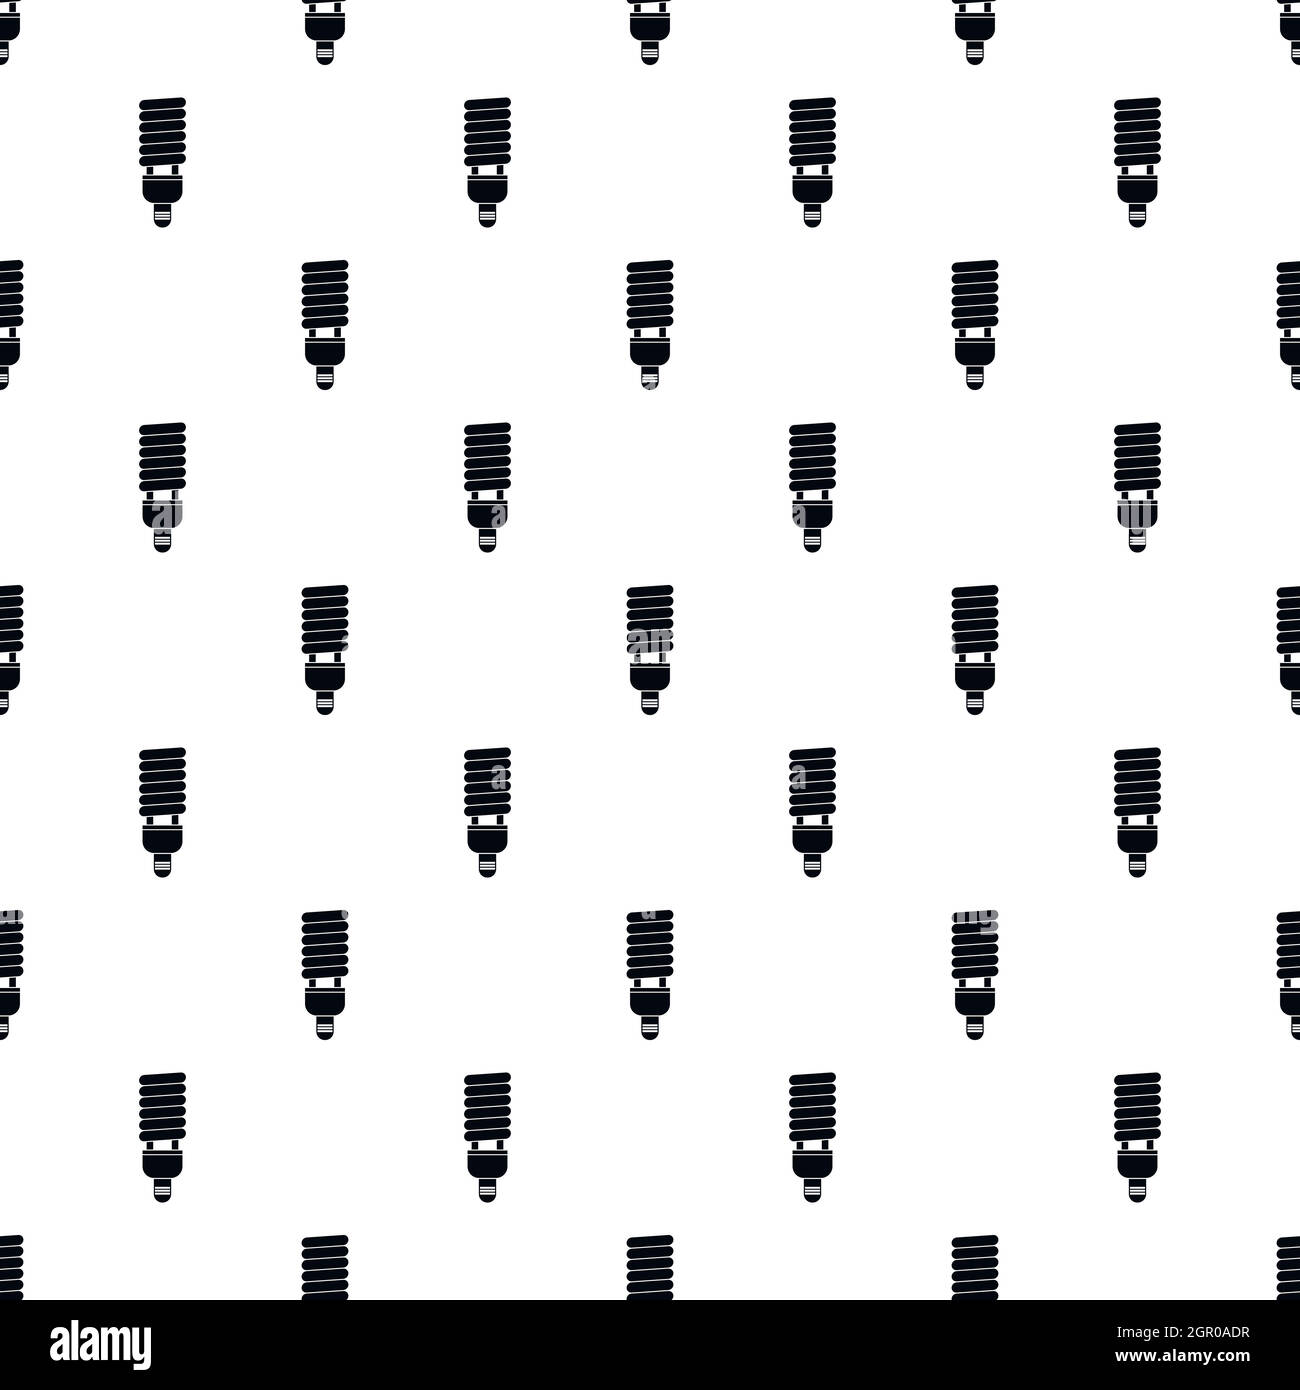 CFL light pattern, simple style Stock Vector